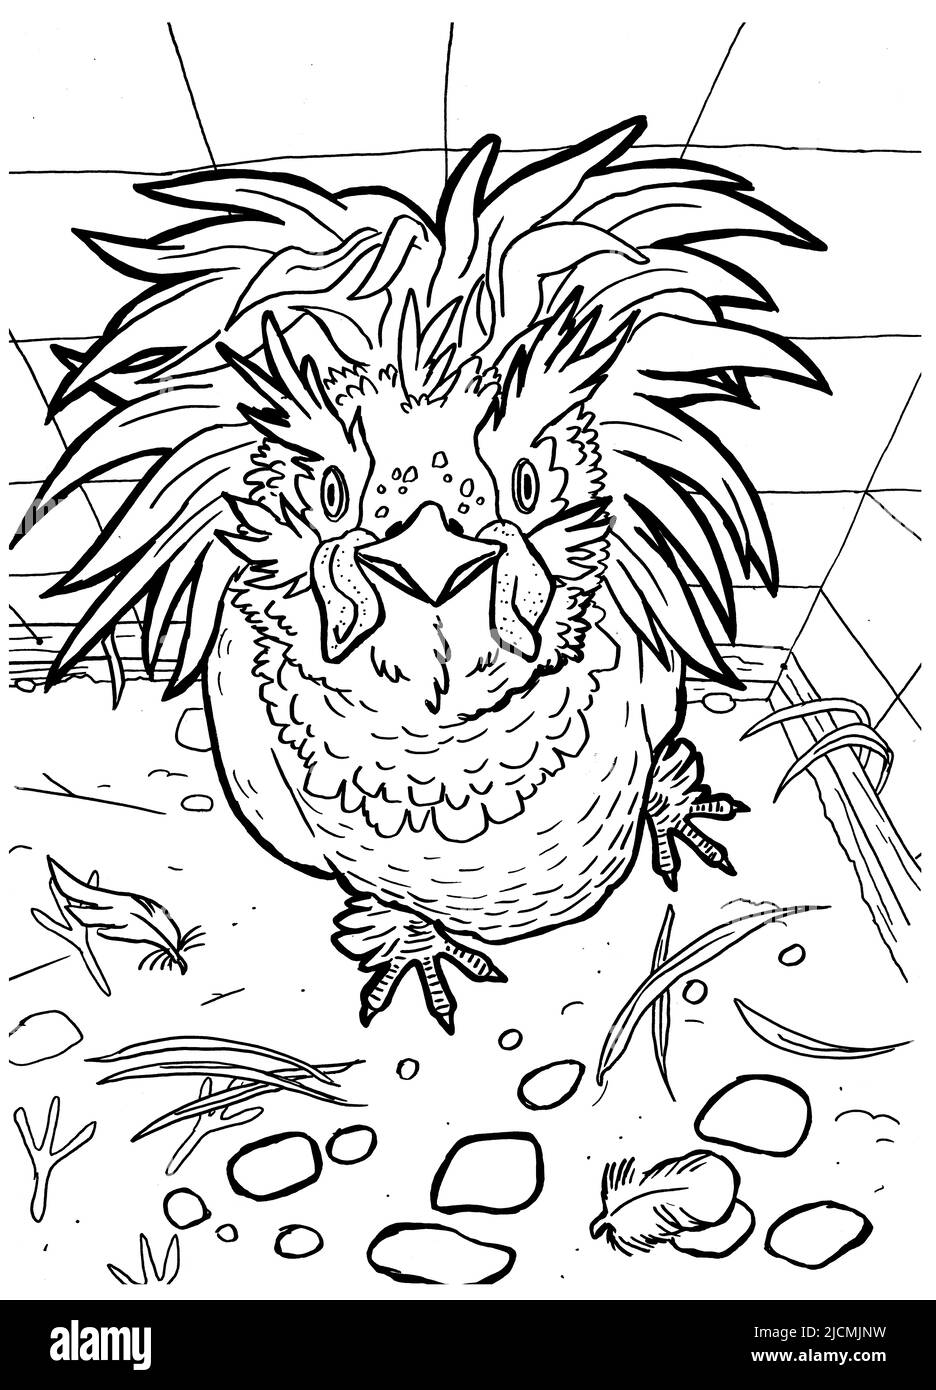 Black and white coloring page ink illustration of a chicken. Stock Photo